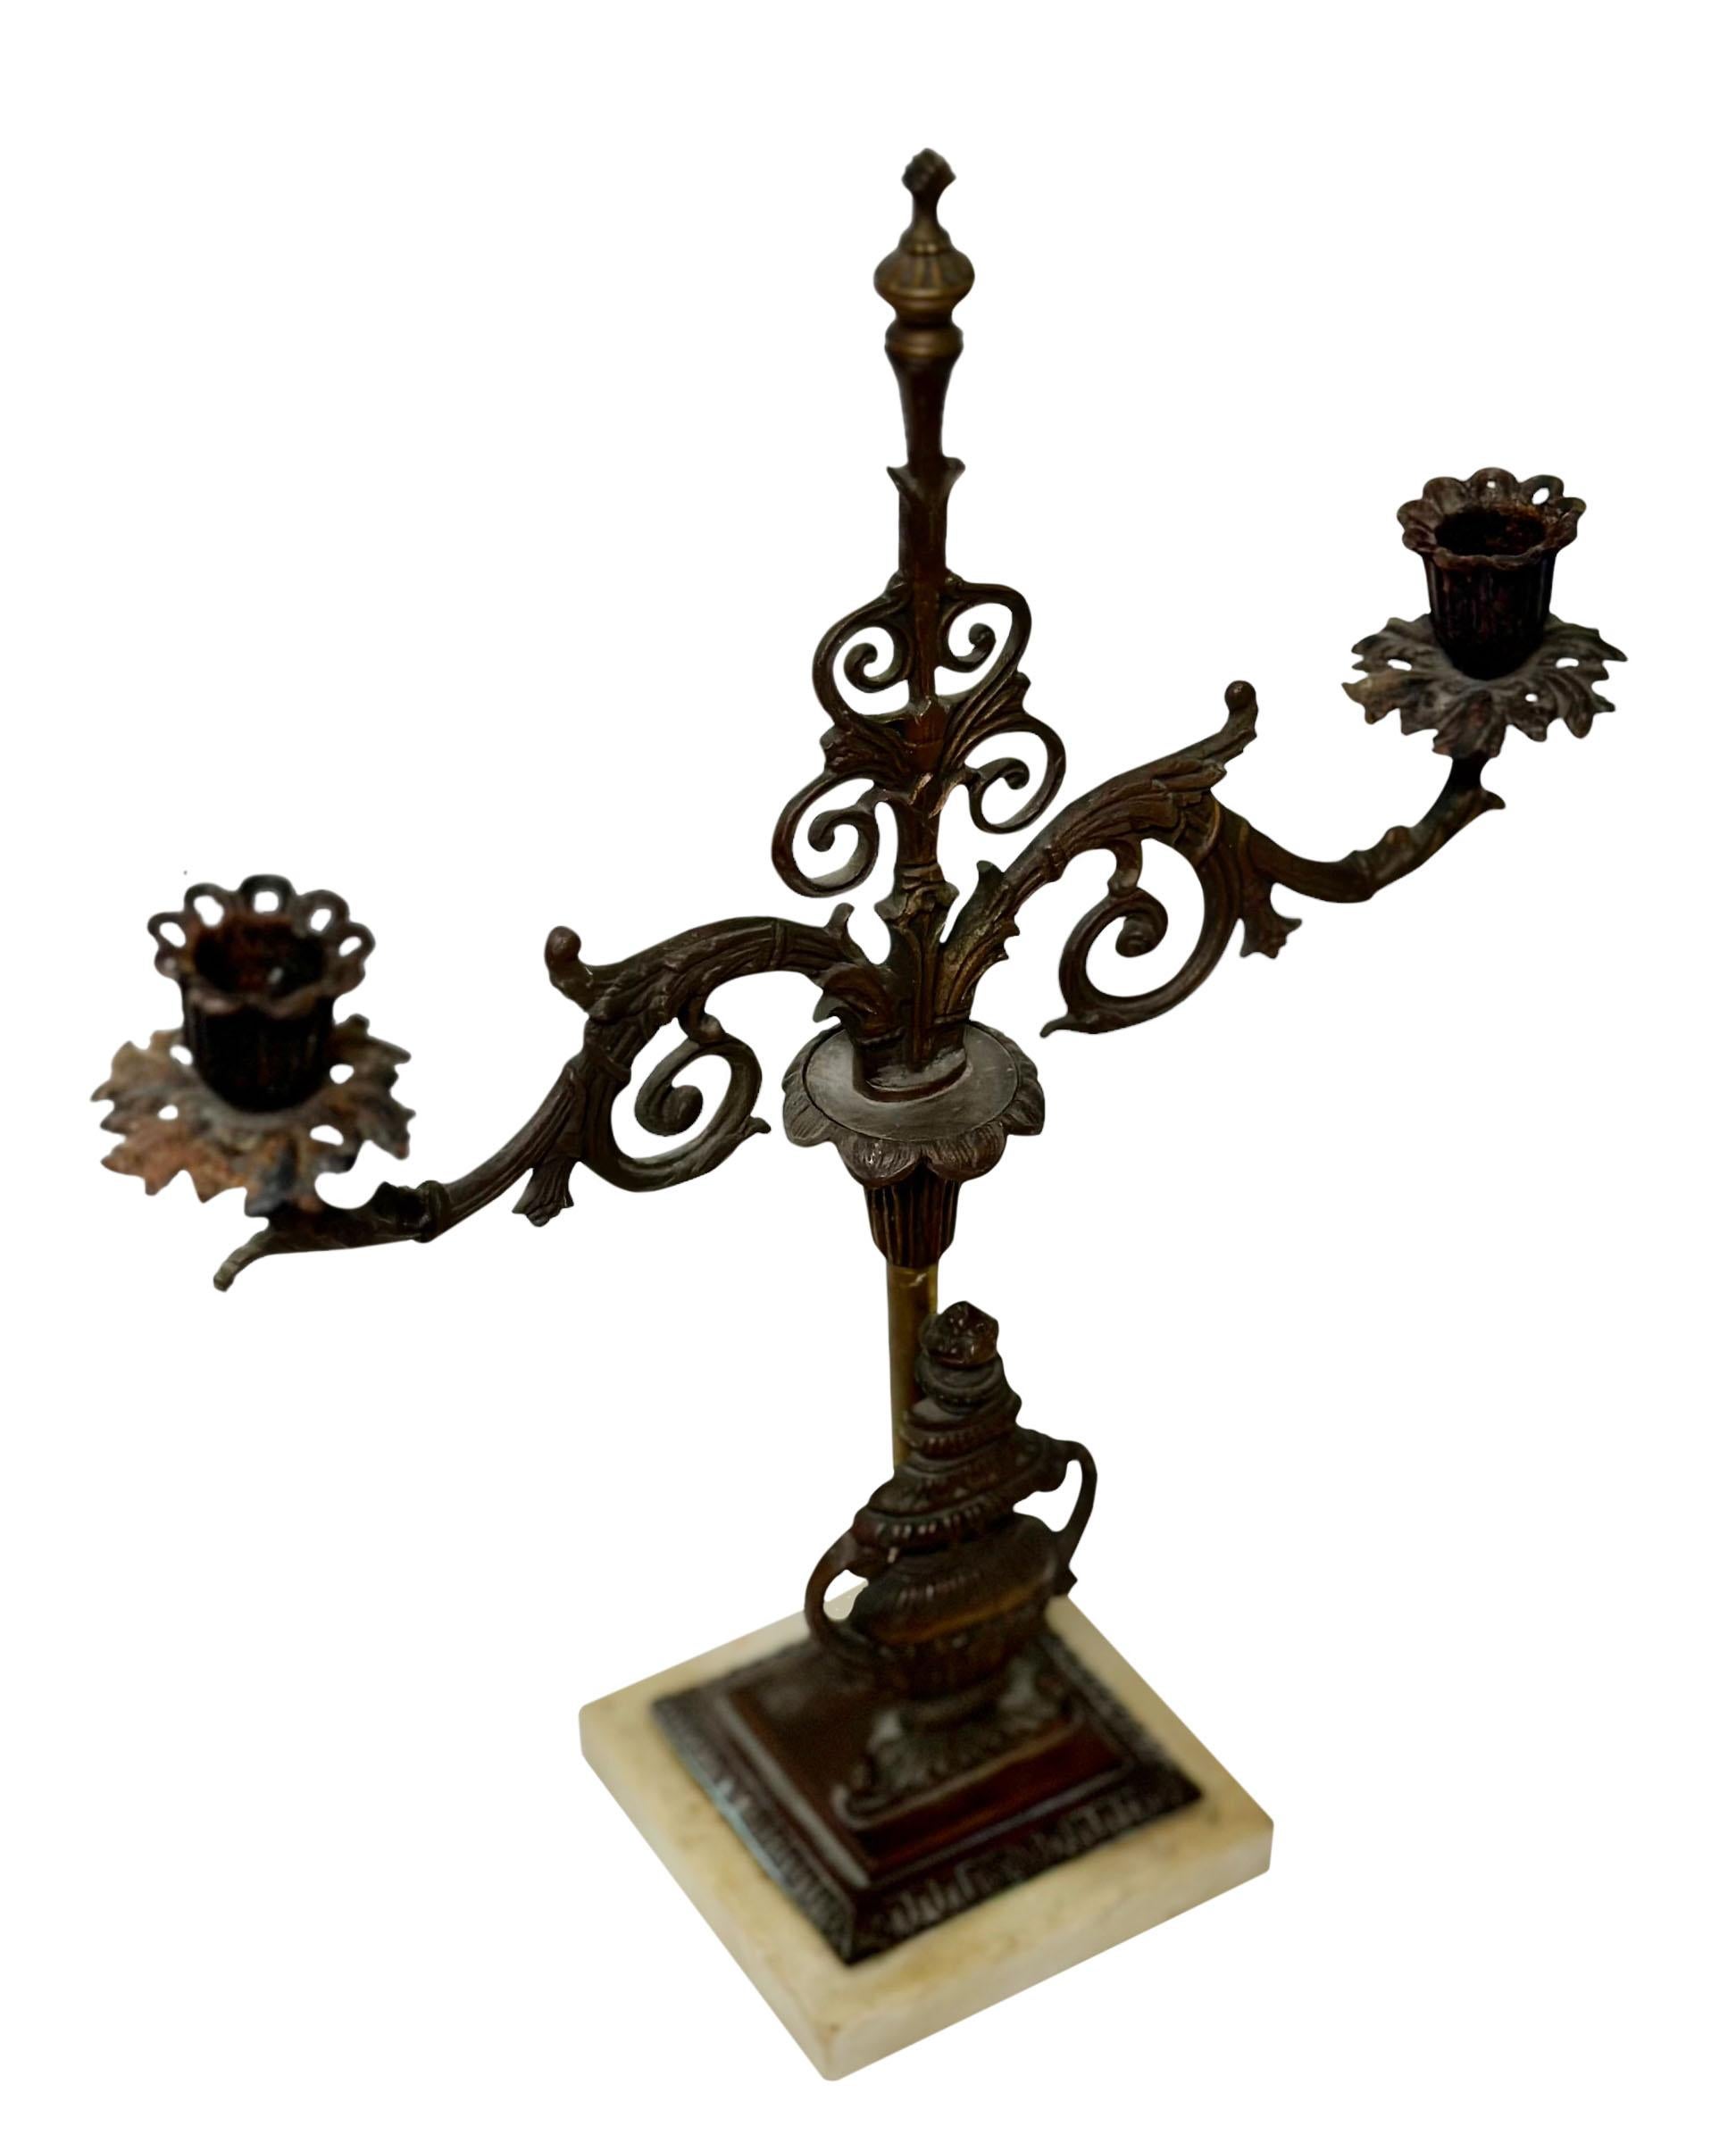 An elegant antique French bronze double arm candlestick with a dark patina and a white marble base. 19th century, France. 